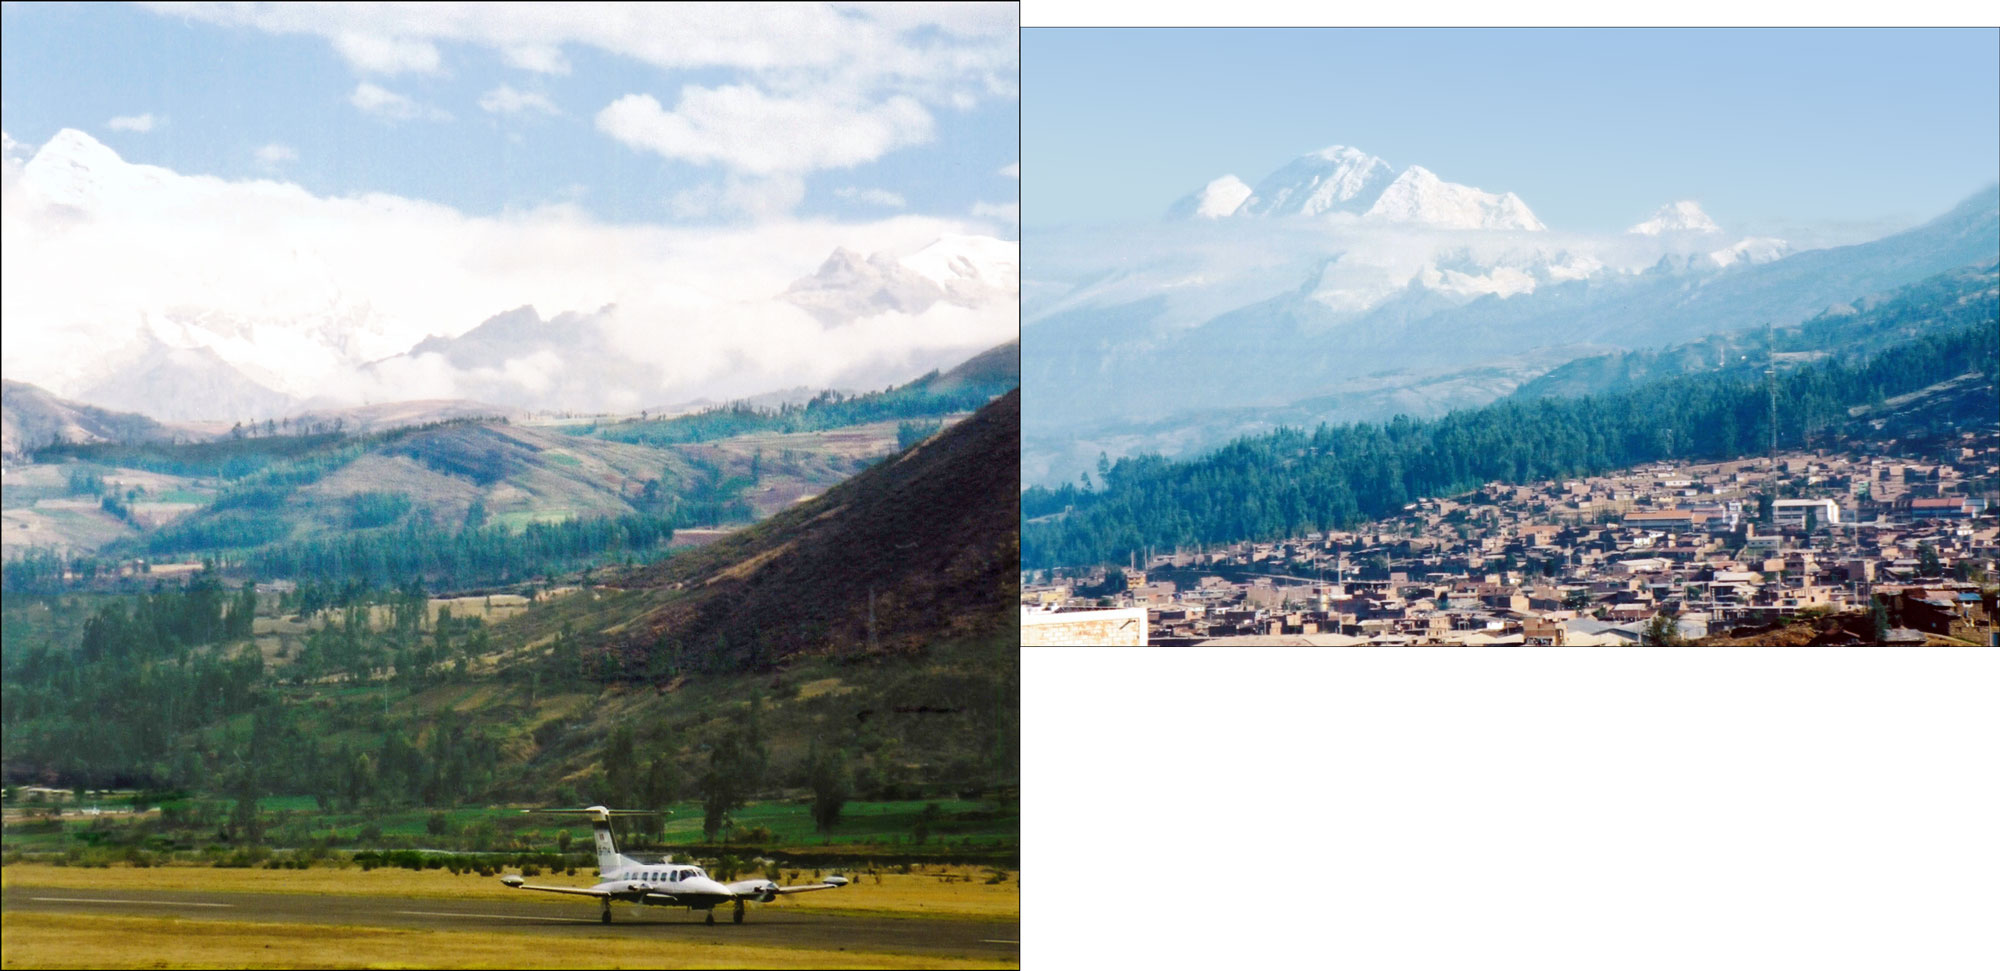 The Cordillera Blanca and the arrival of the charter plane